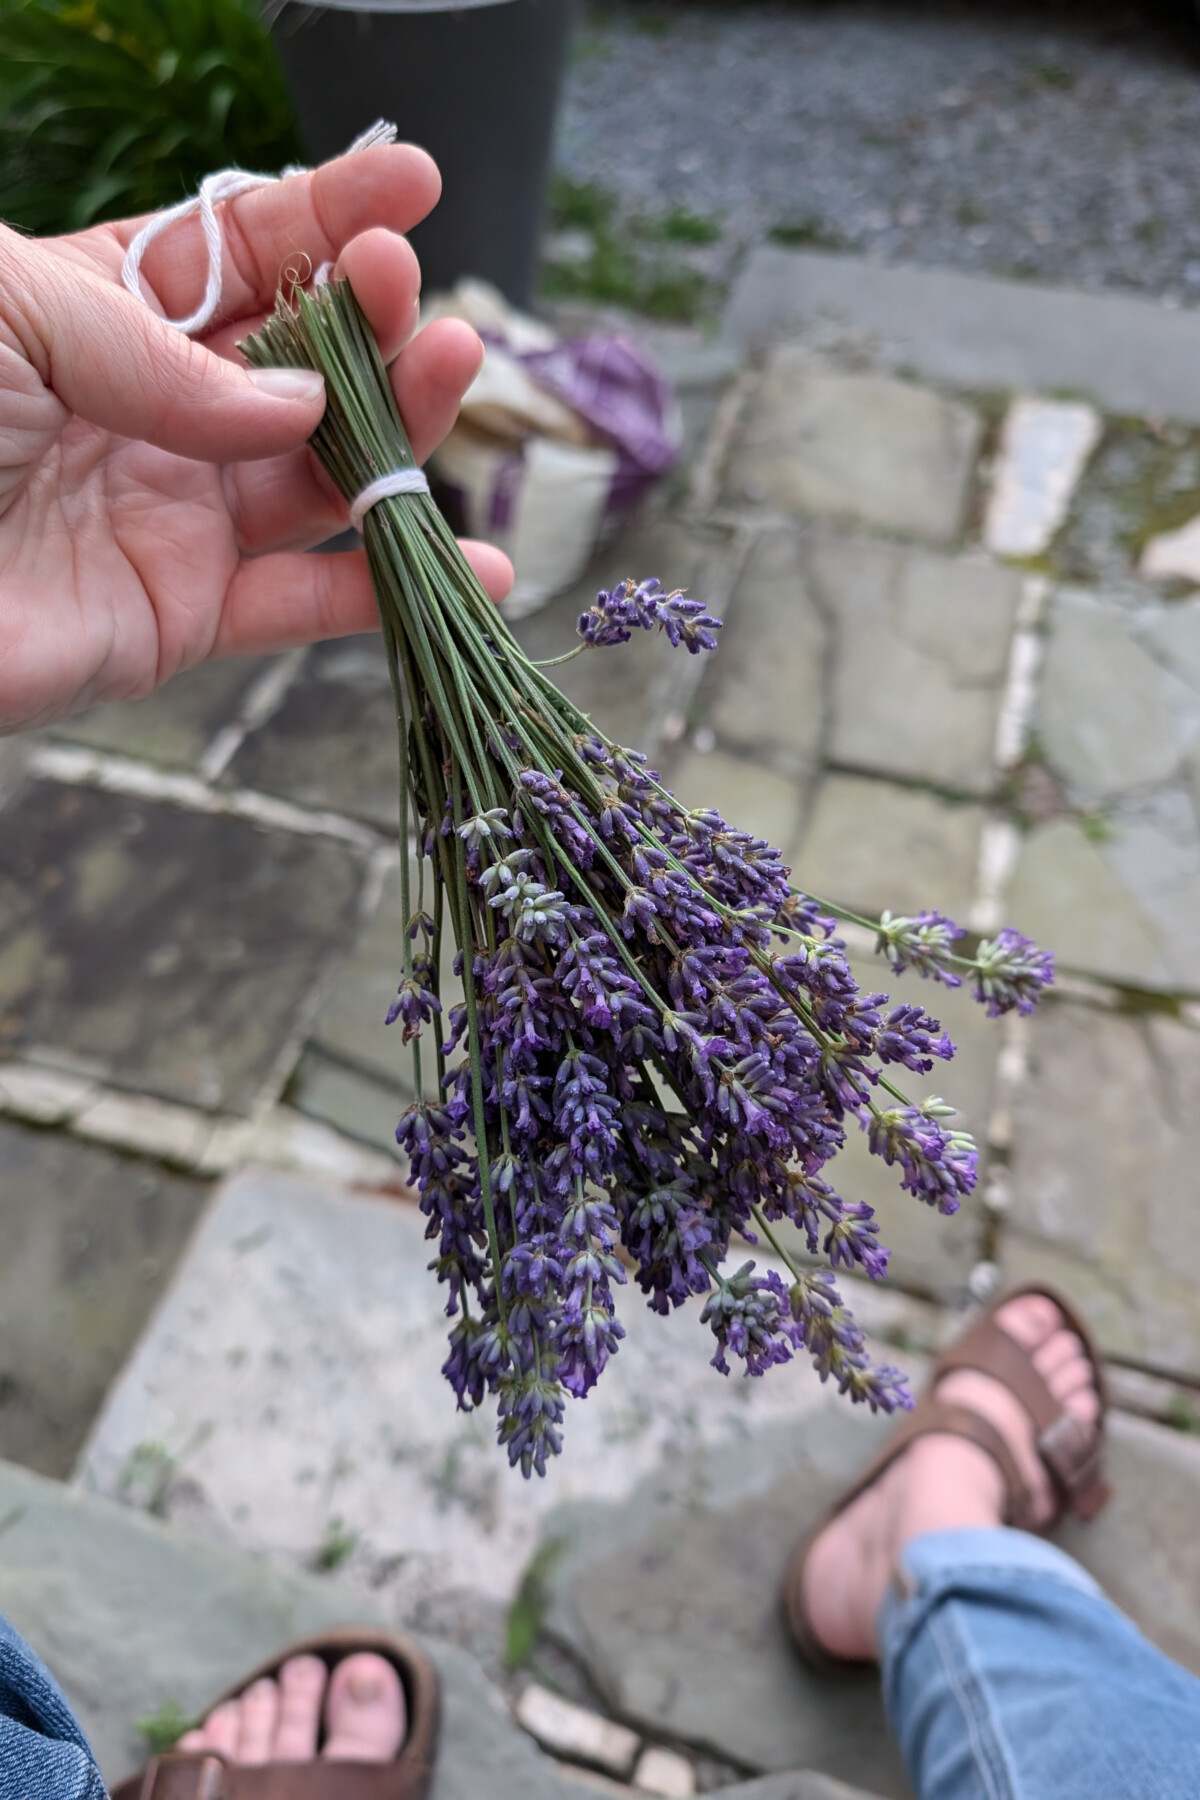 Woman's hand holding a bundle of fresh lavender